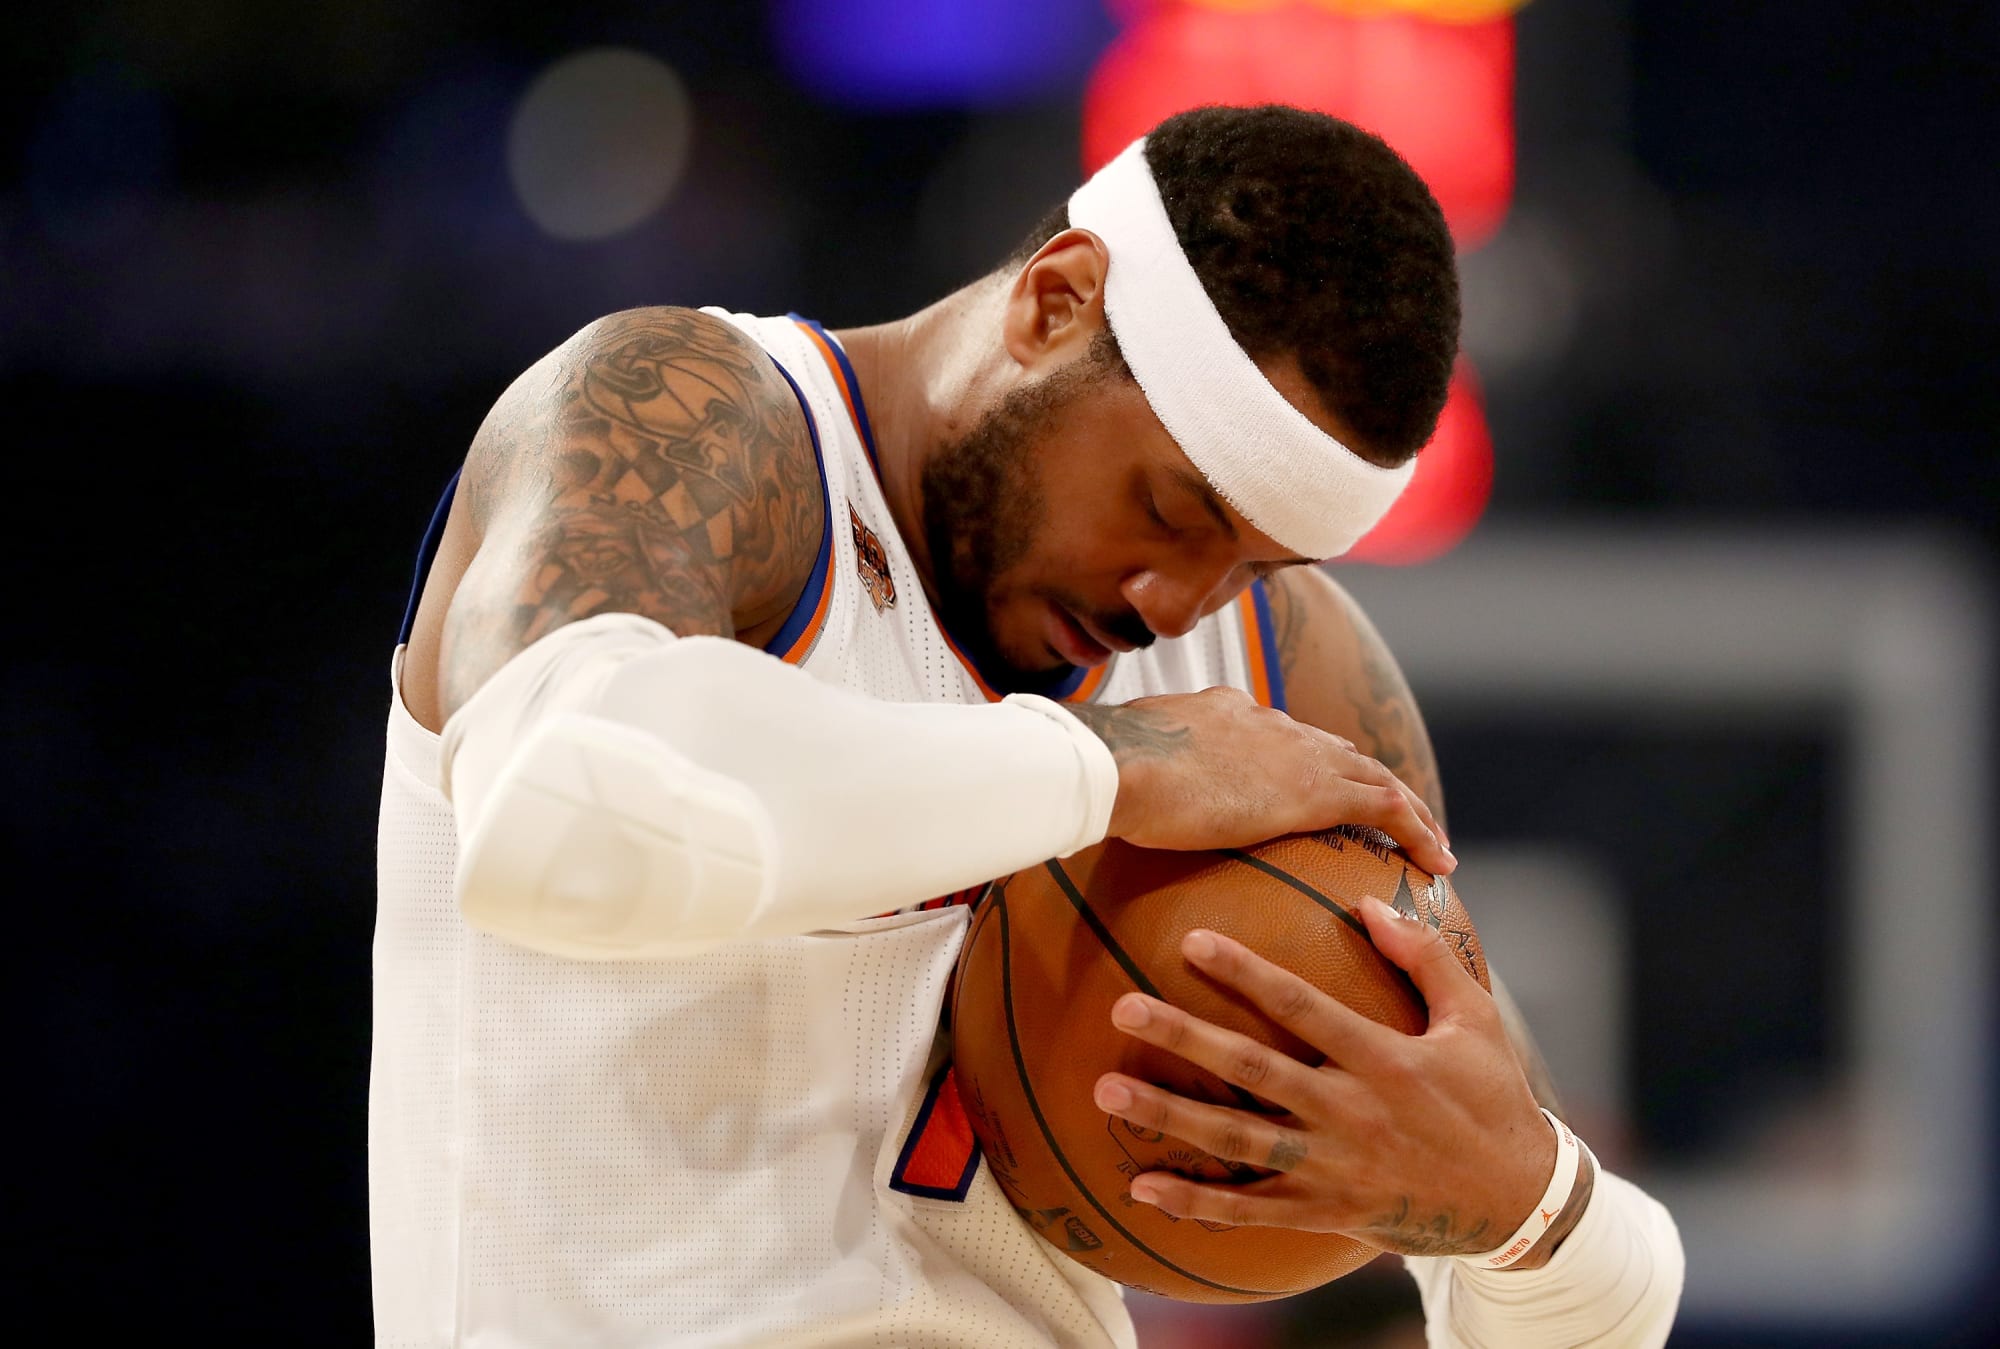 Carmelo Anthony: How Much Was He to Blame for Trouble With the Knicks? -  The New York Times